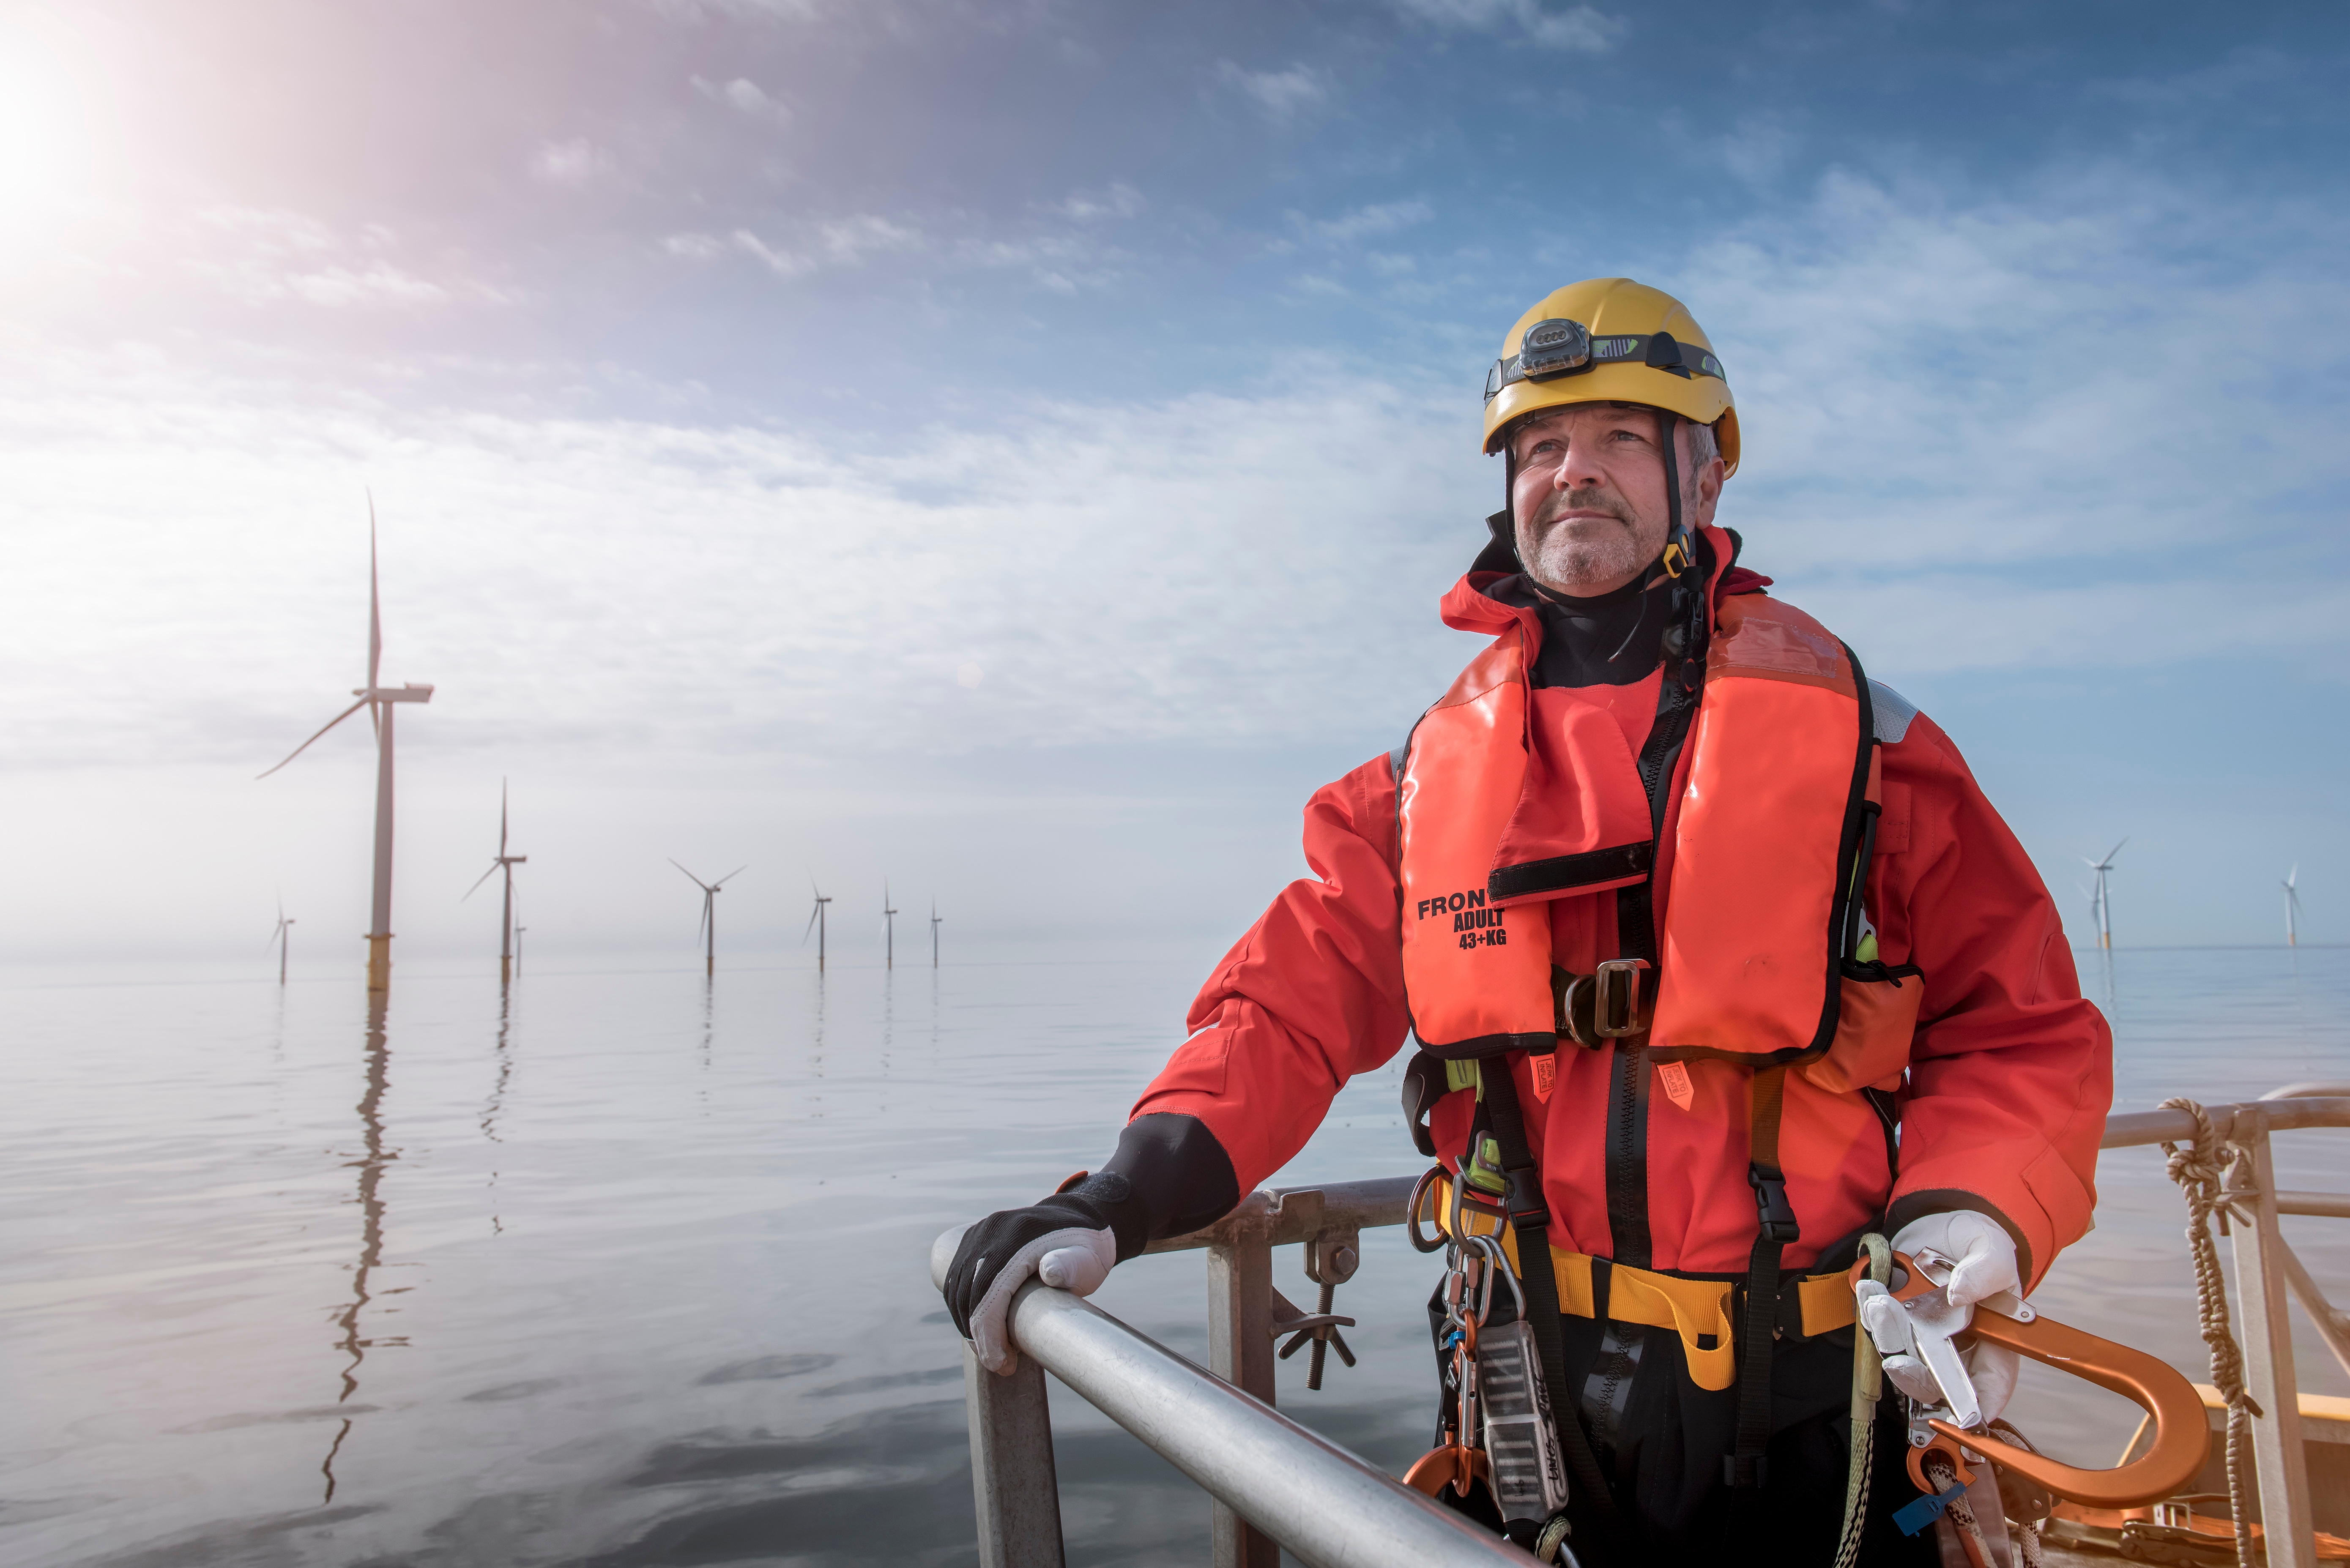 Engineer dramatically in front of an offshore wind farm